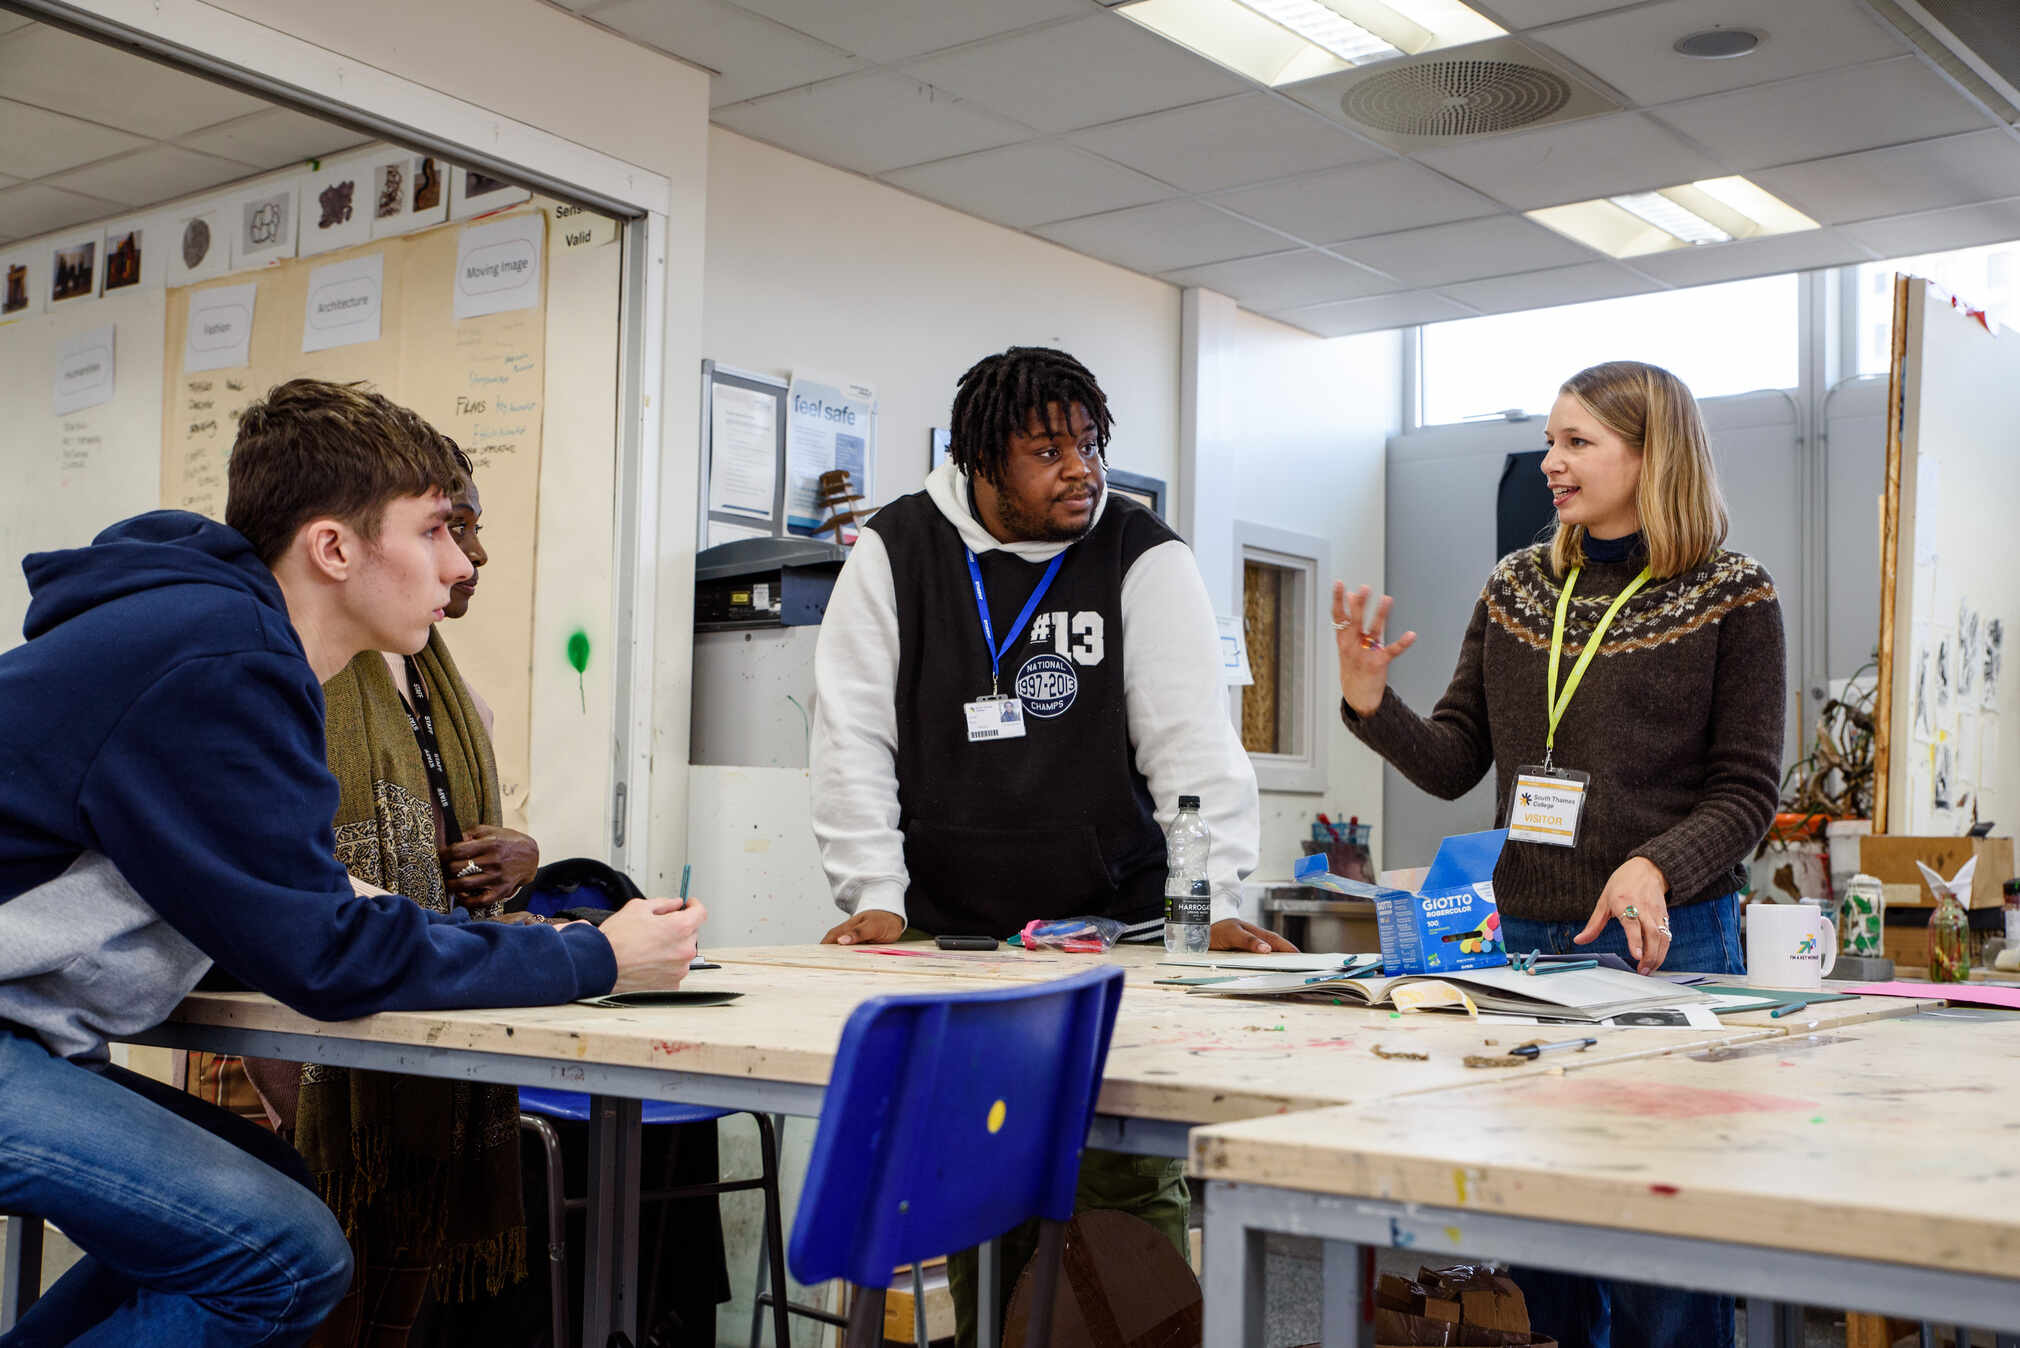 Students take part in the Royal College of Art Workshop 